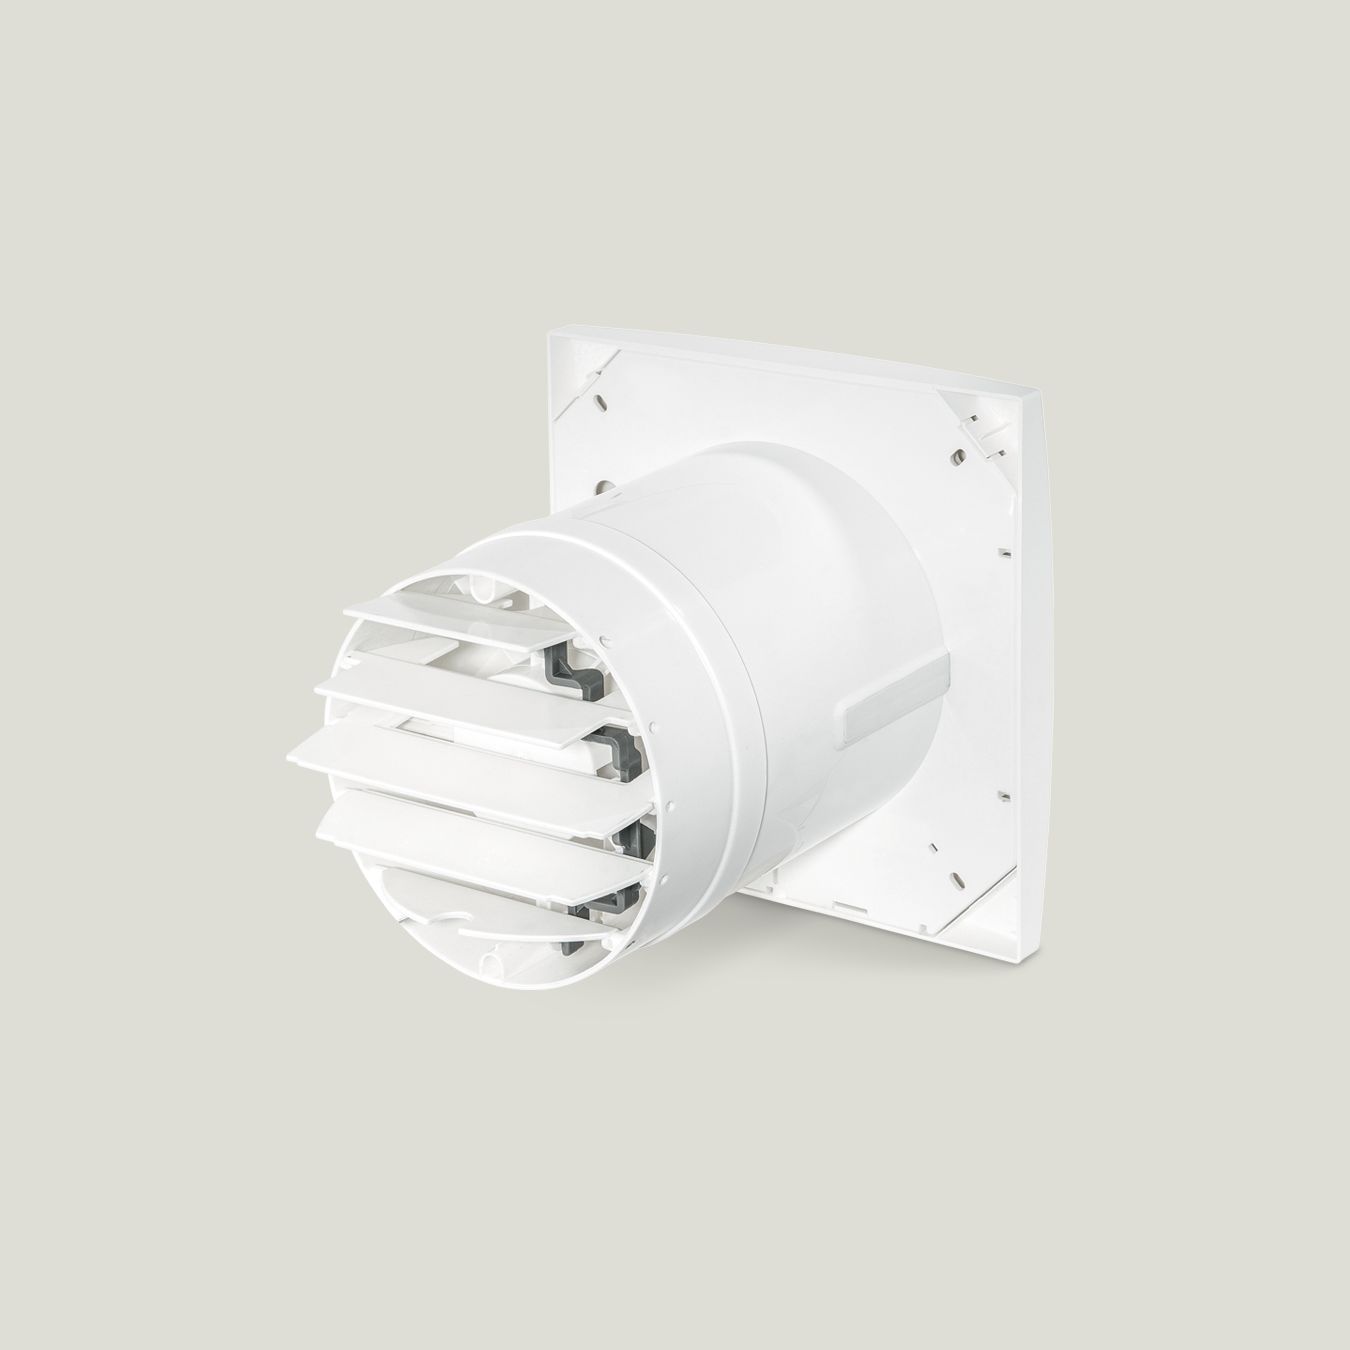 150mm square slim white finish exhaust fans with shutters - AU Site